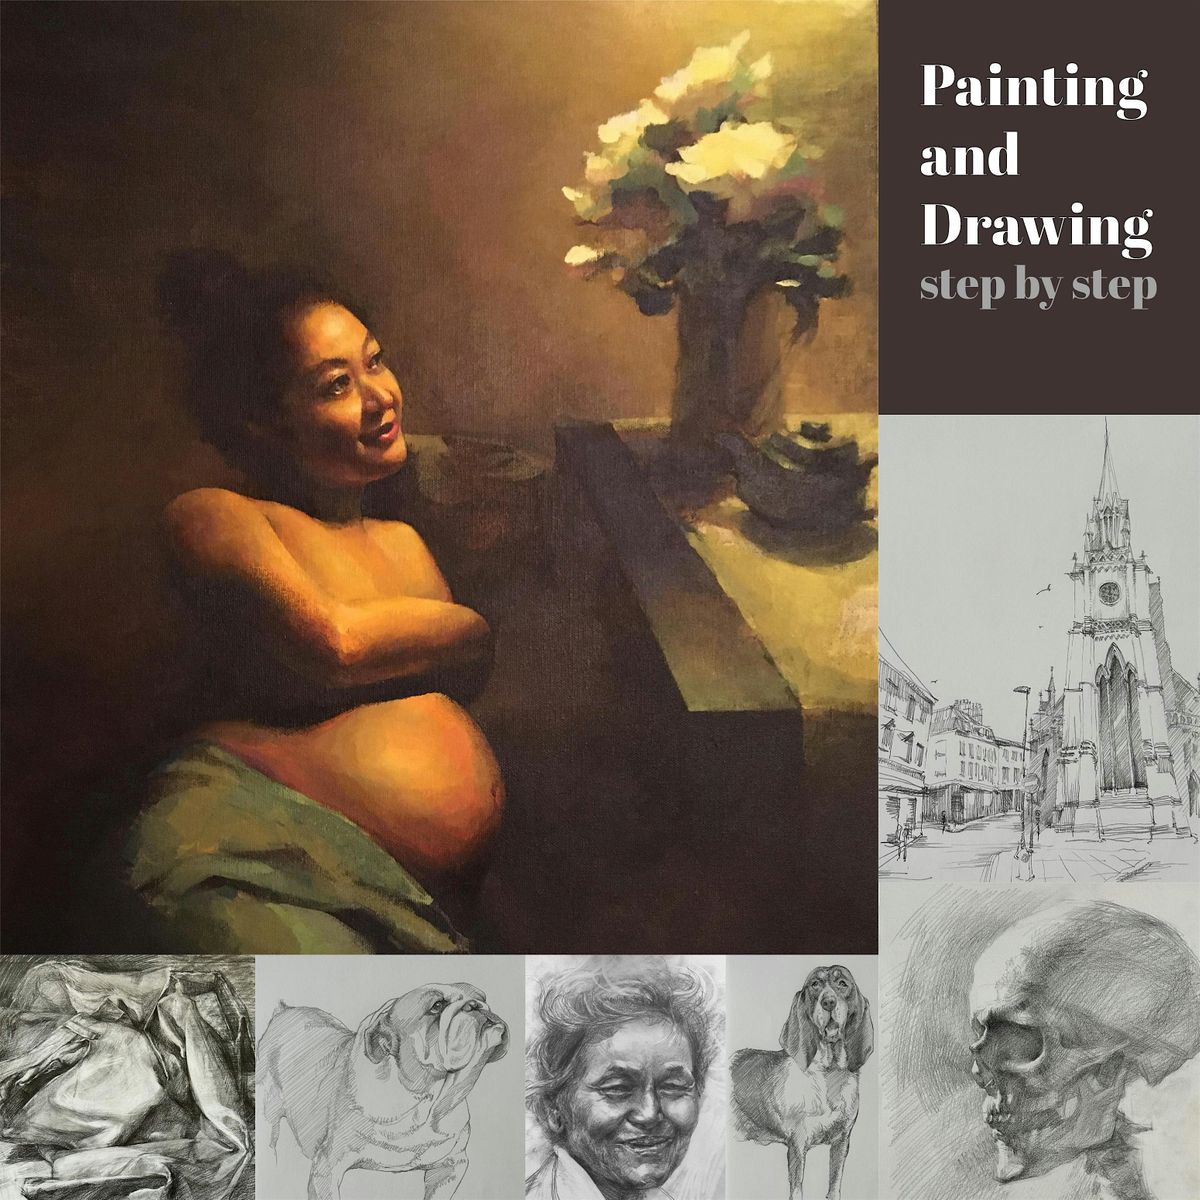 Painting and Drawing- step by step